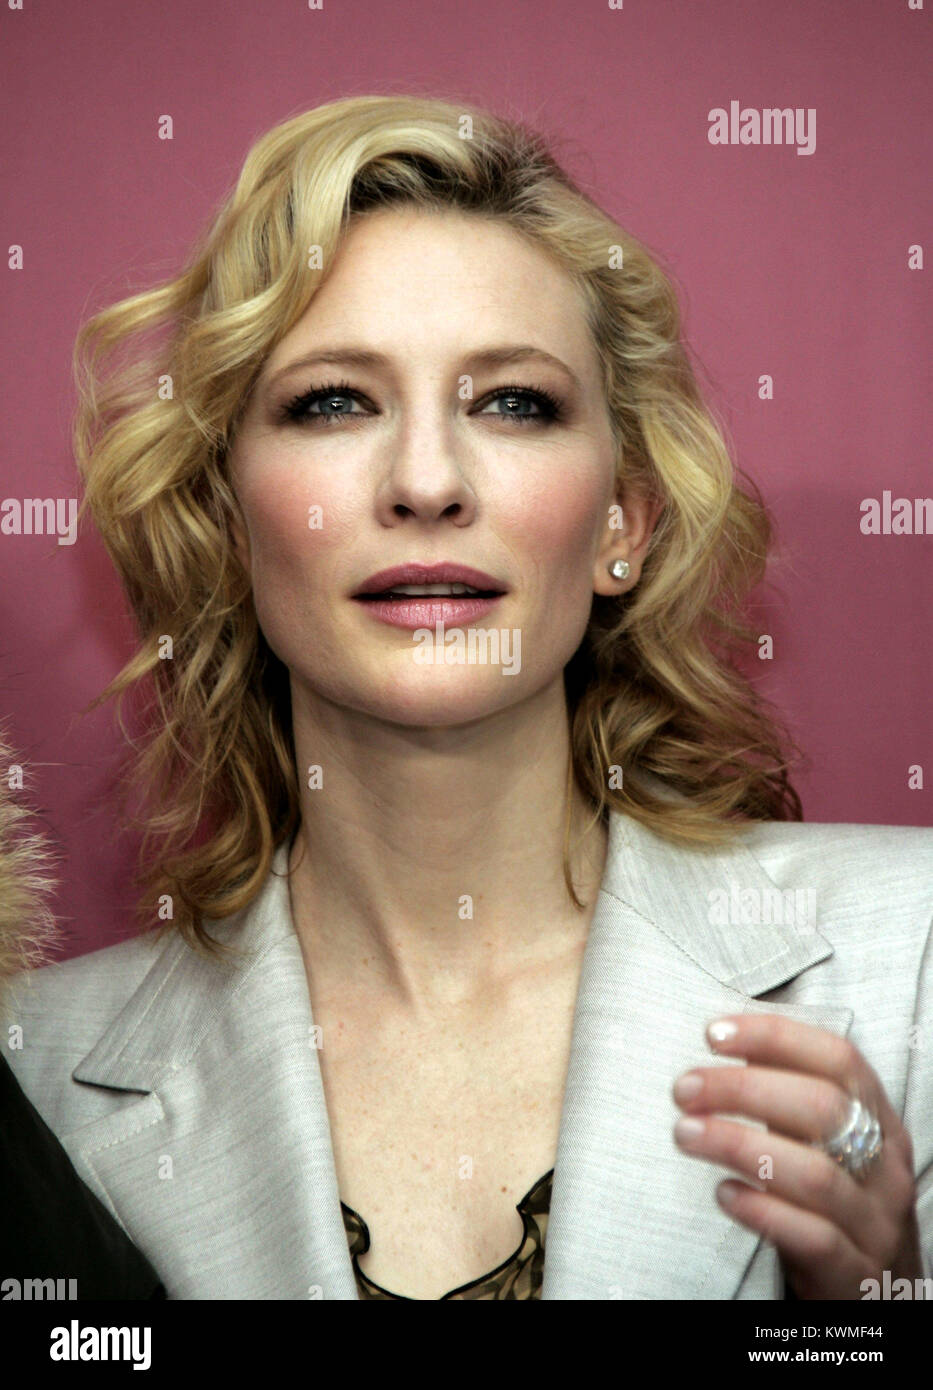 Berlin, Germany. 16th Feb, 2005. (dpa) - Australian actress Cate Blanchett, leading actress of the US competition film 'The Life Aquatic with Steve Zissou' pictured during the presentation of the film at the 55th Berlinale international film festival in Berlin, Germany, 16 February 2005. A total of 21 films compete for the Golden and Silver Bear prizes at the Berlinale. | usage worldwide Credit: dpa/Alamy Live News Stock Photo